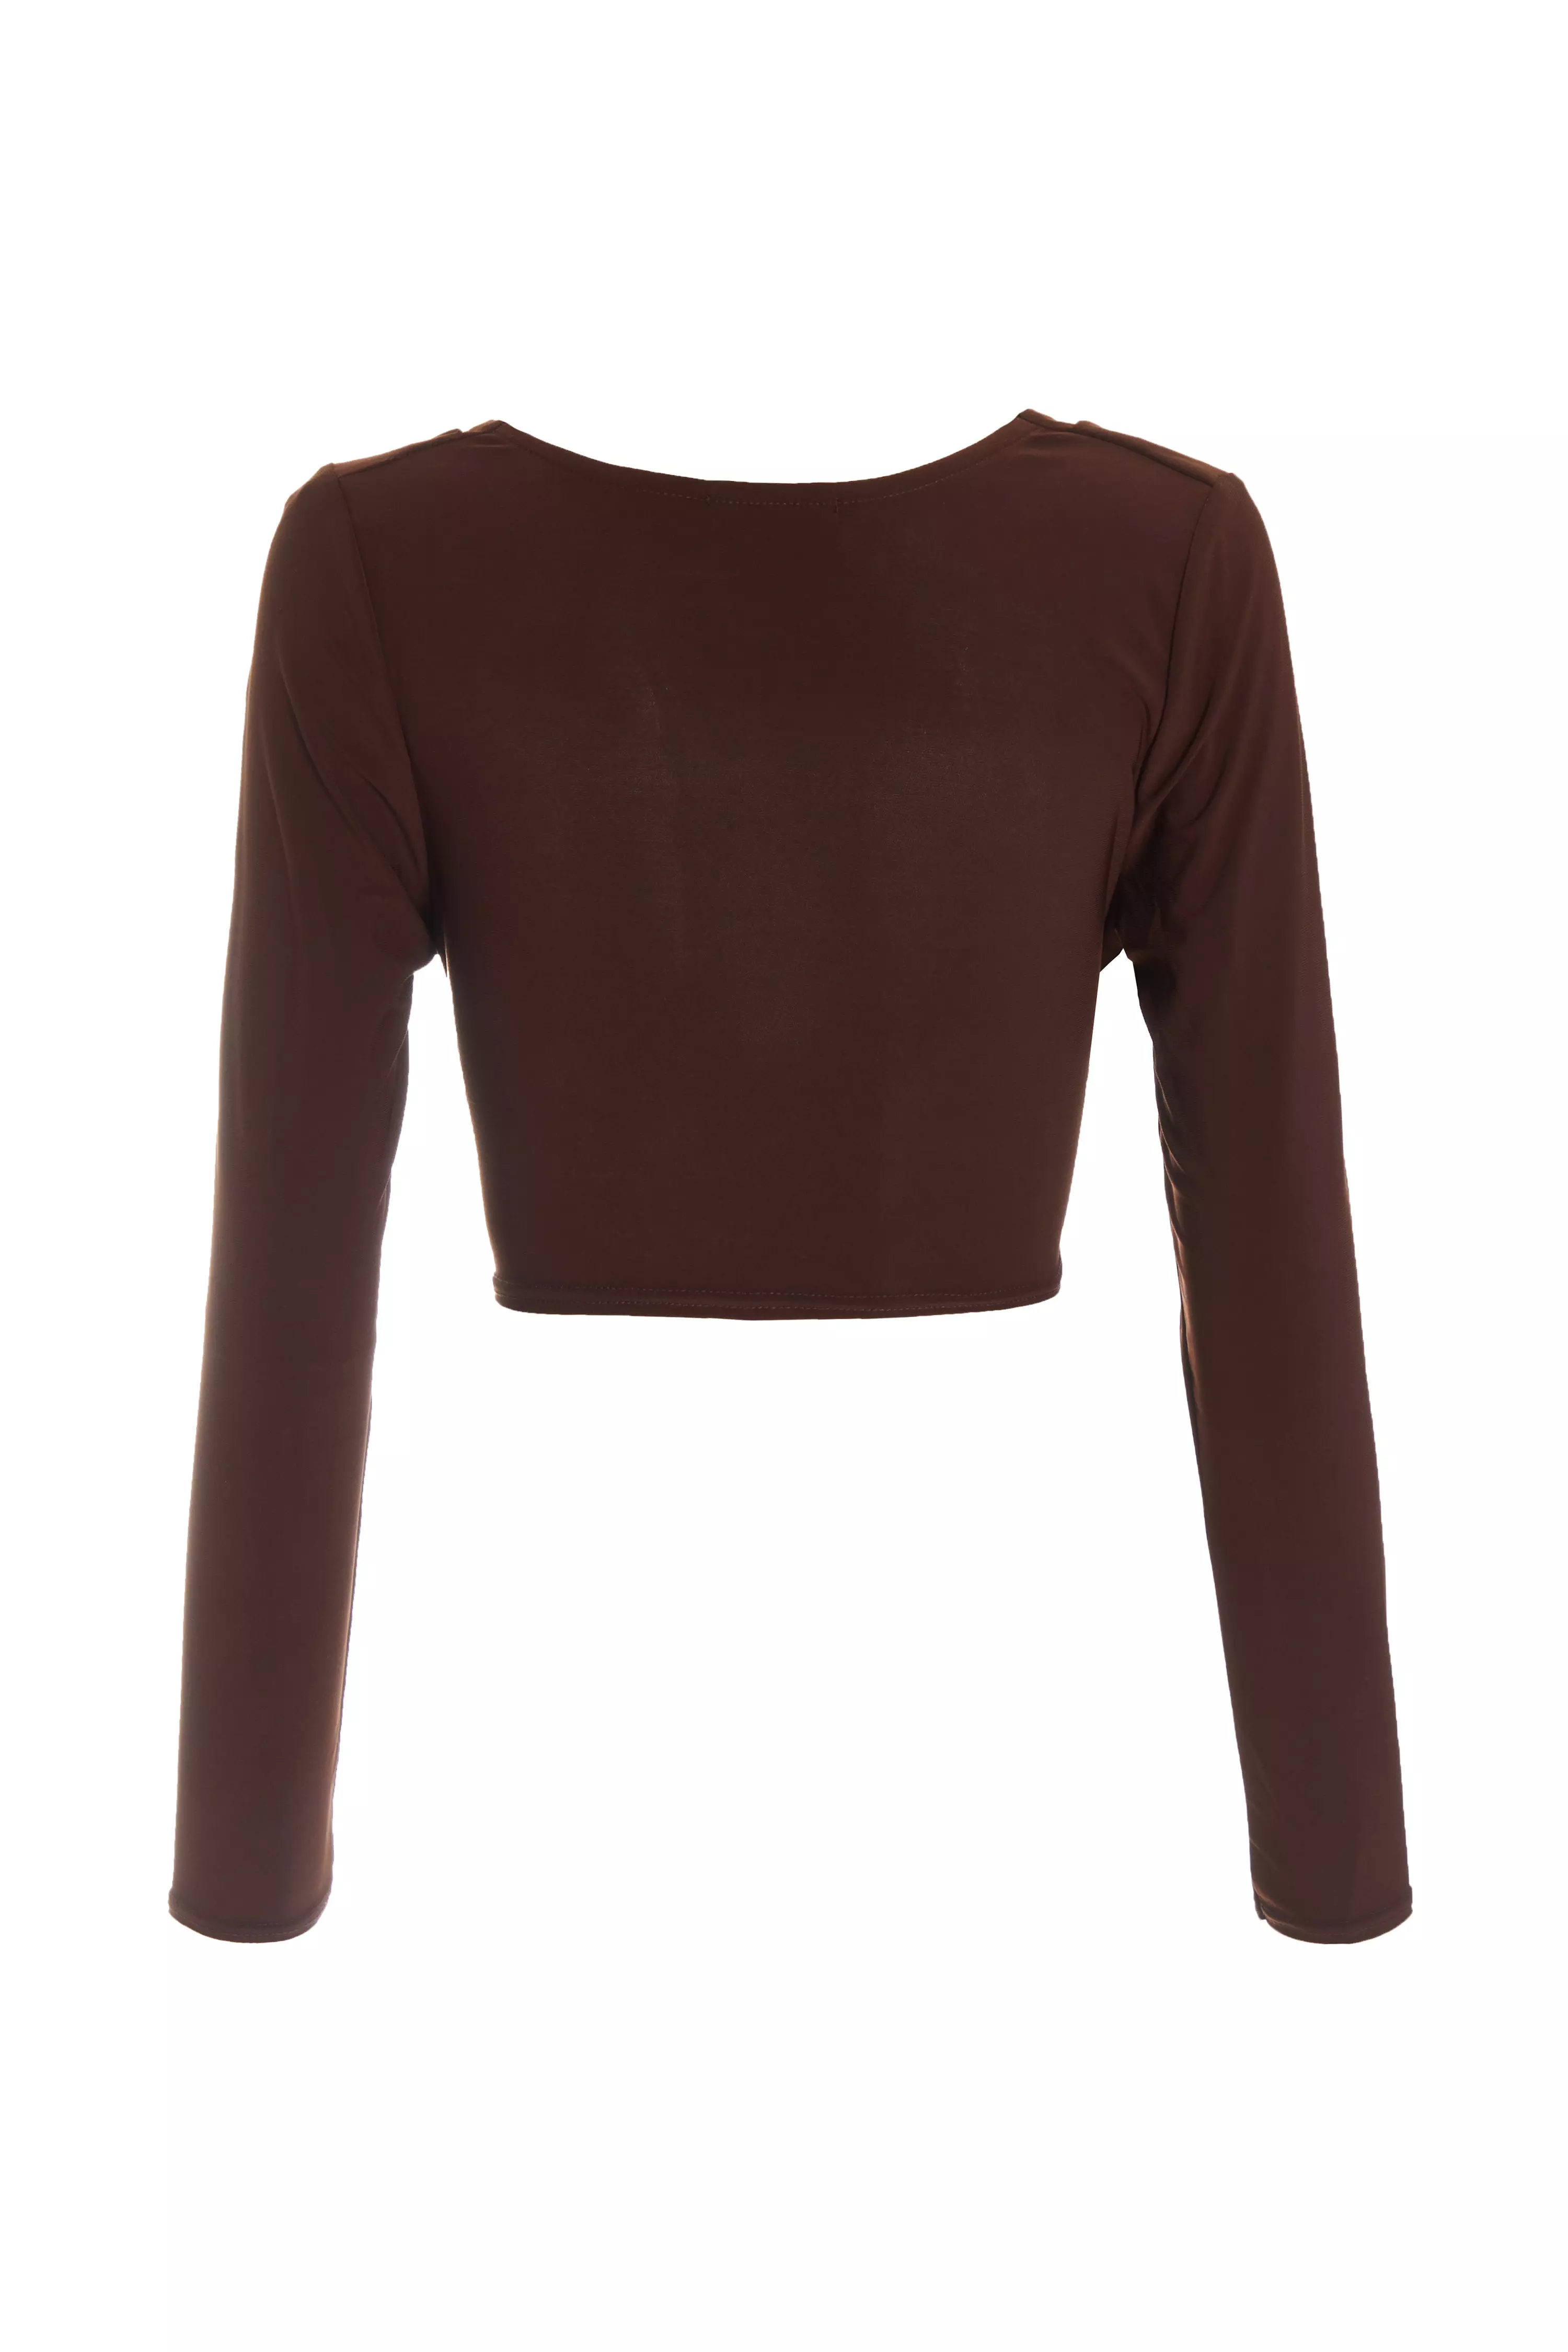 Brown Ruched Cowl Neck Top